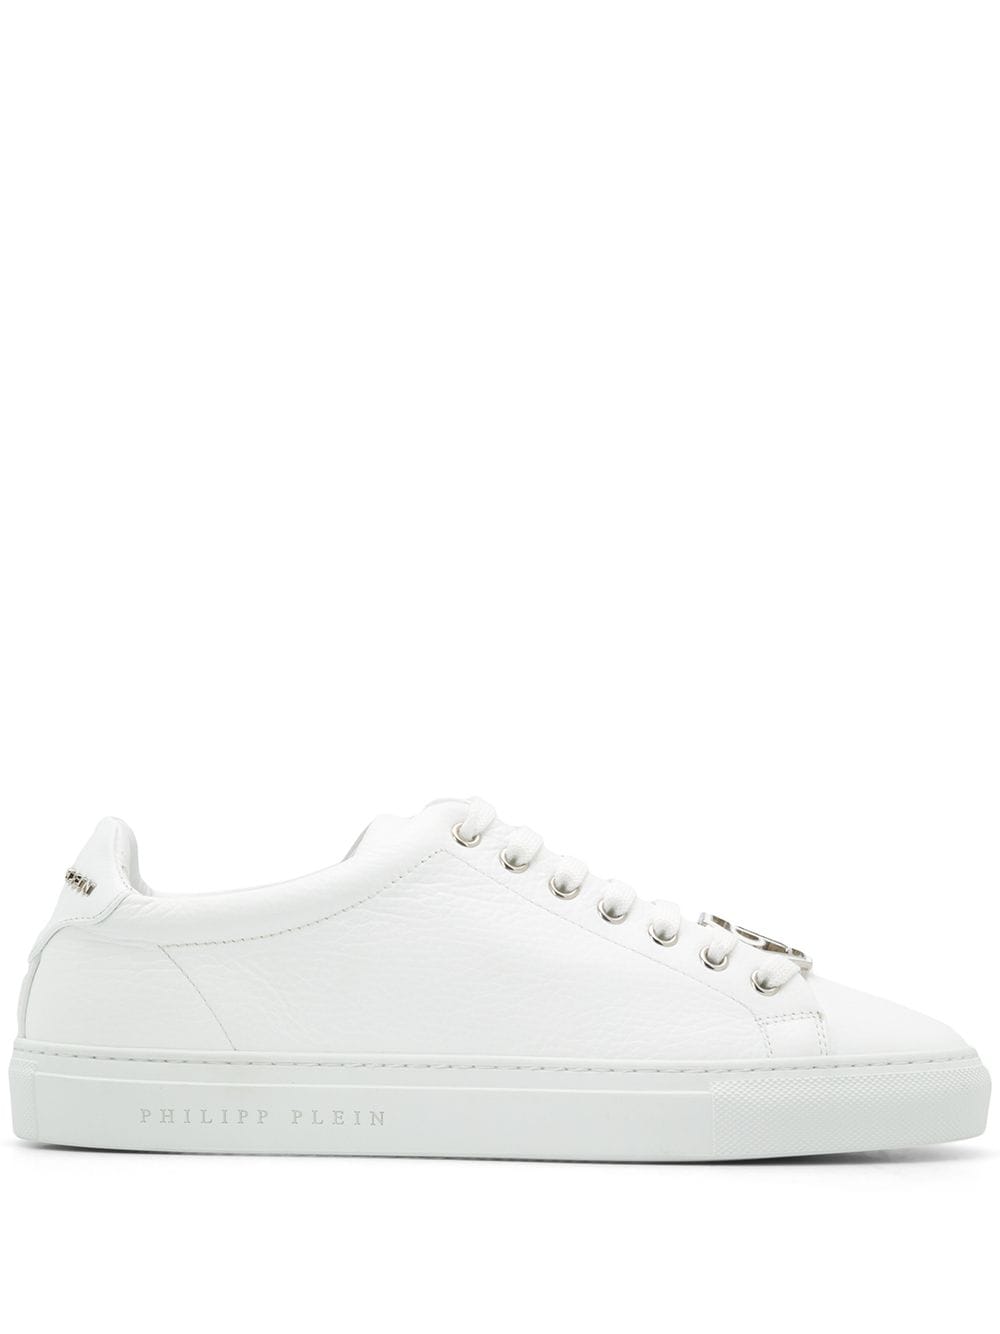 philipp plein sneakers prices in south africa